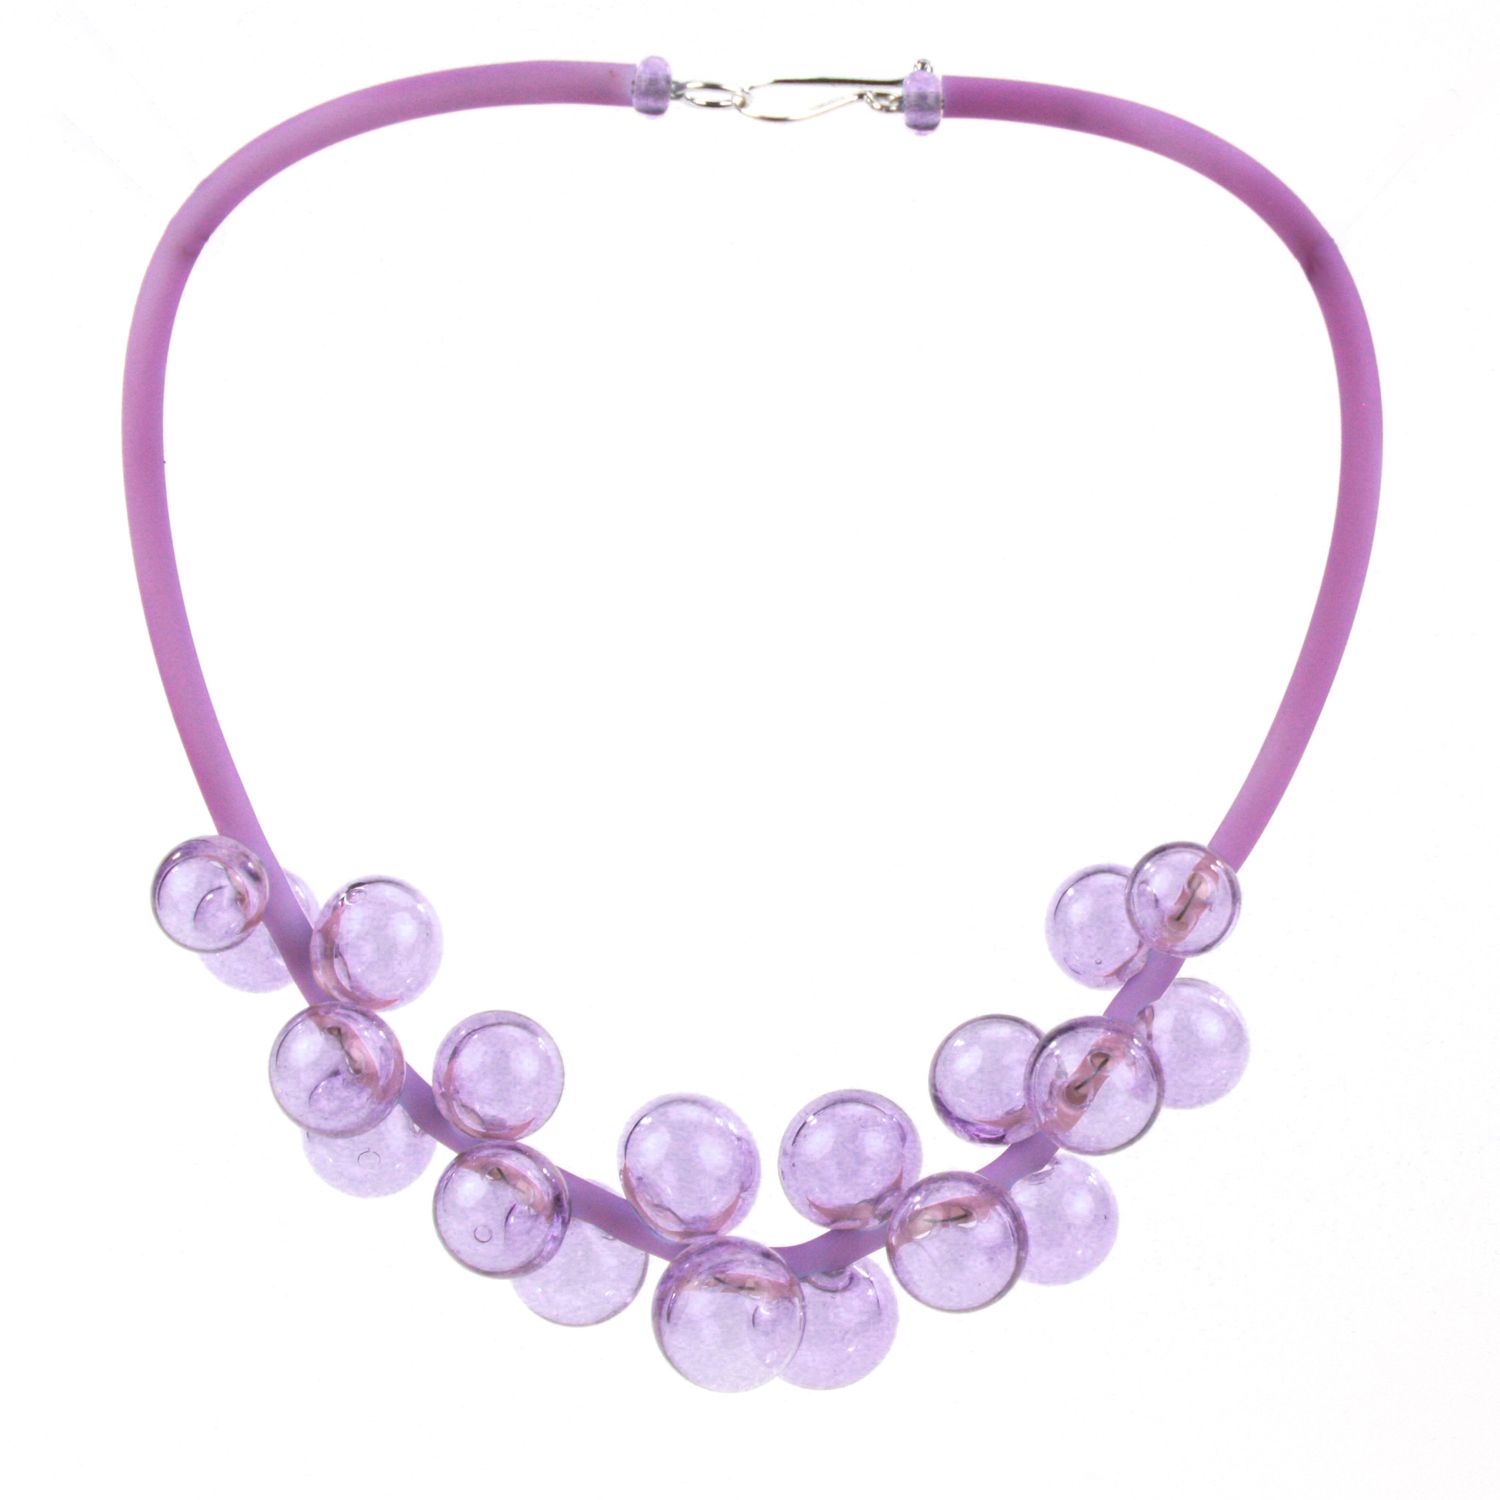 Alicia Niles: Chroma Bolla Necklace – Blue/Purple changing colour Product Image 6 of 6